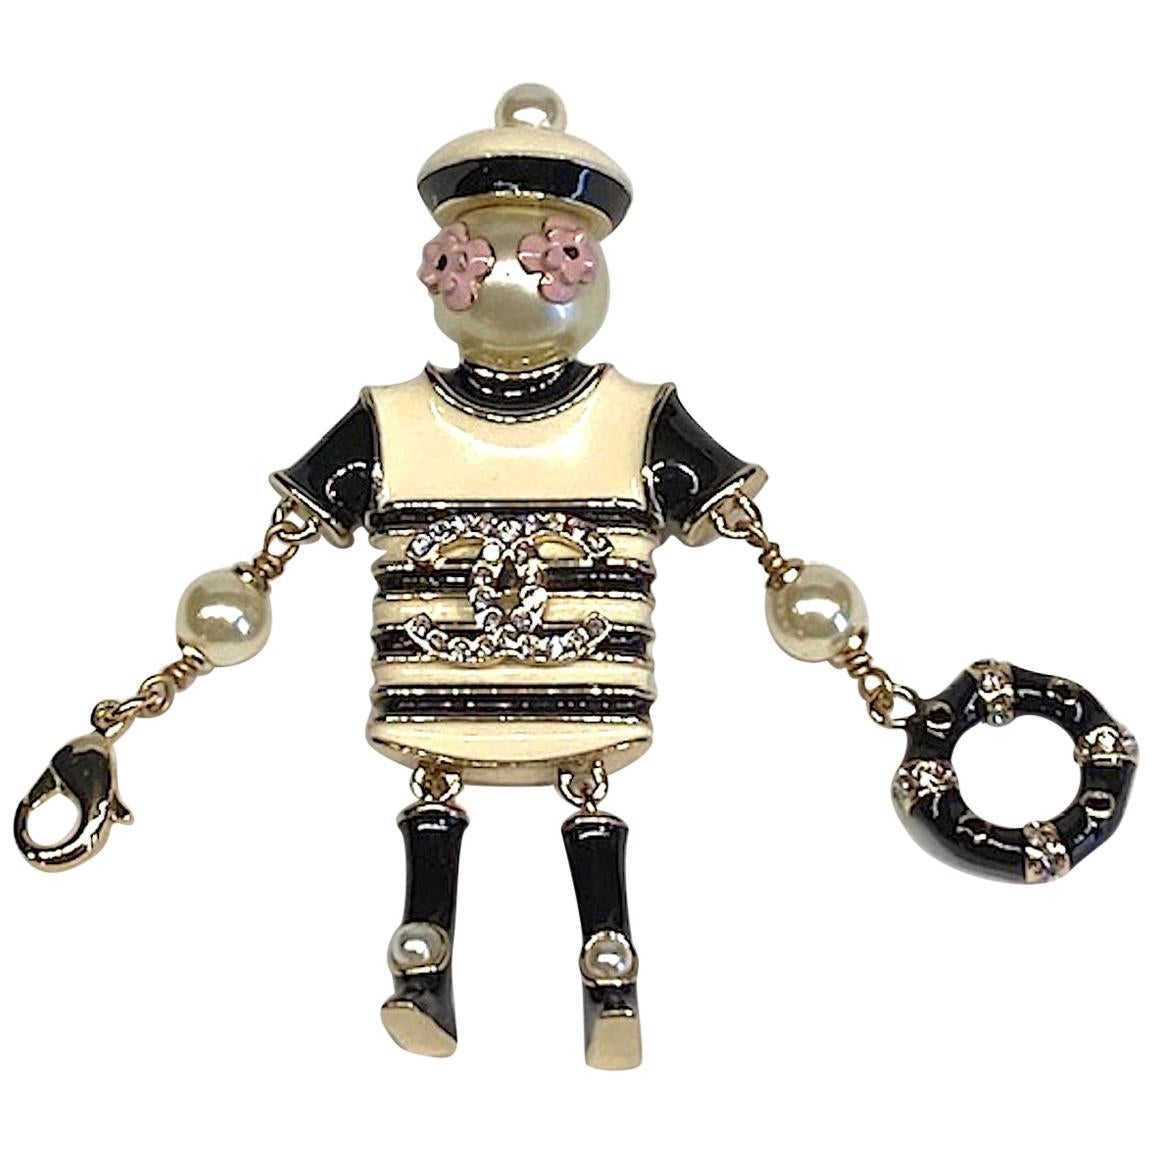 Chanel Nautical Figural Enamel Brooch, Autumn 2019 Collection